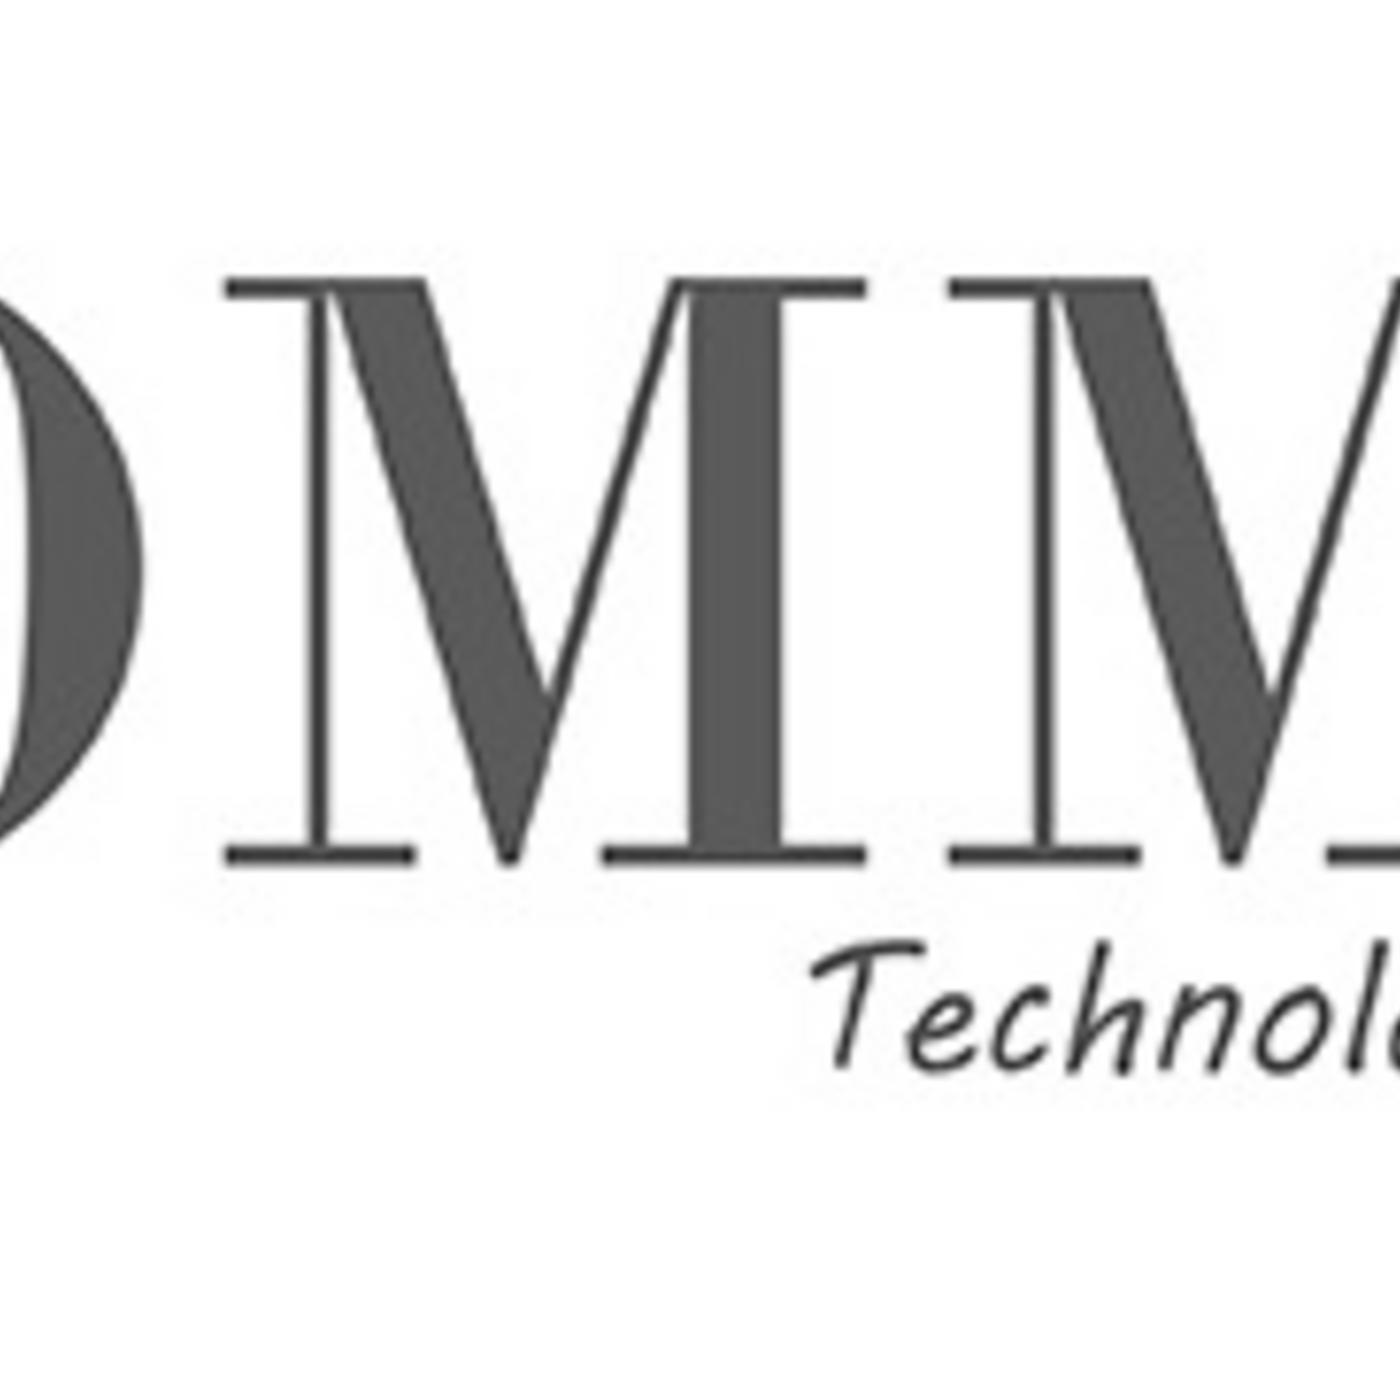 DVCOMM is India's First Tech. Mall